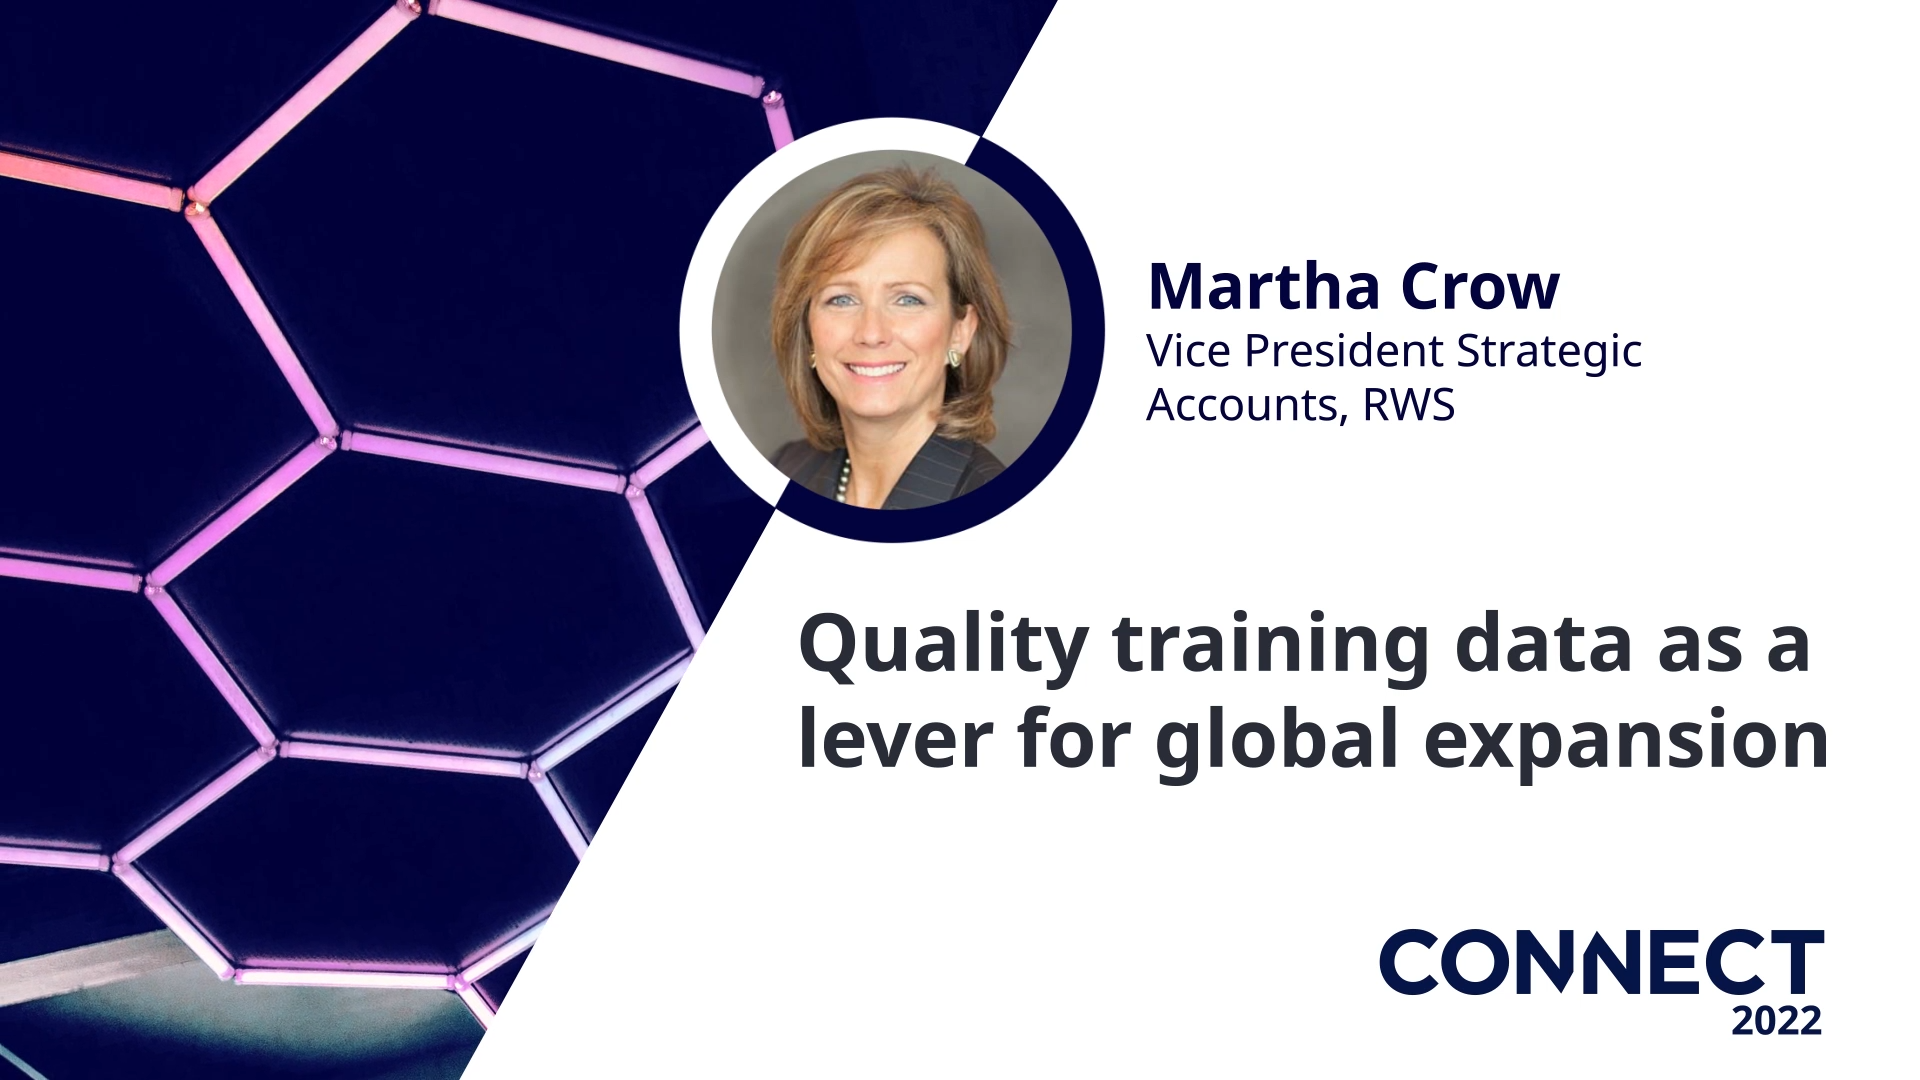 Connect - Quality training data as a lever for global expansion